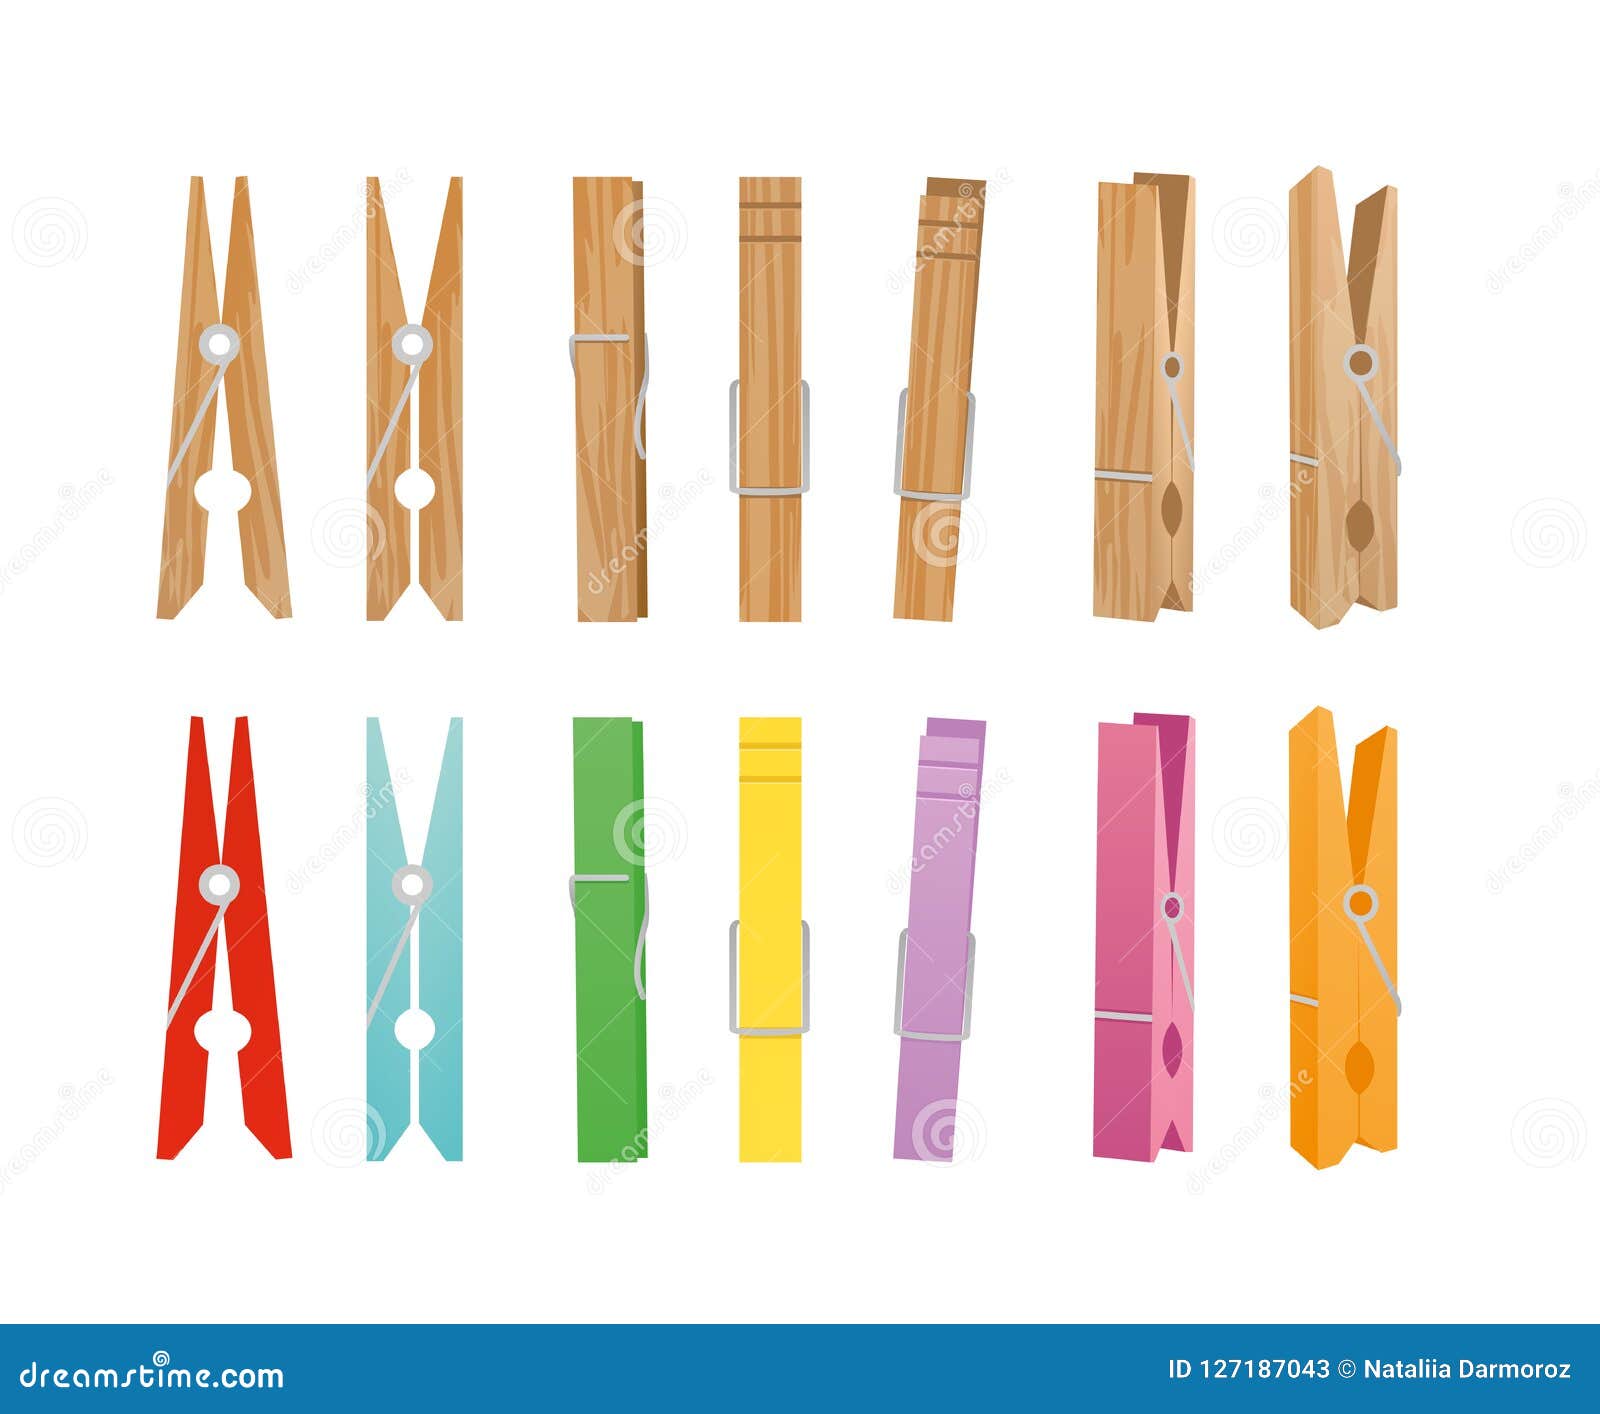   of wooden and clothespin collection on white background. clothespins in different bright colors and